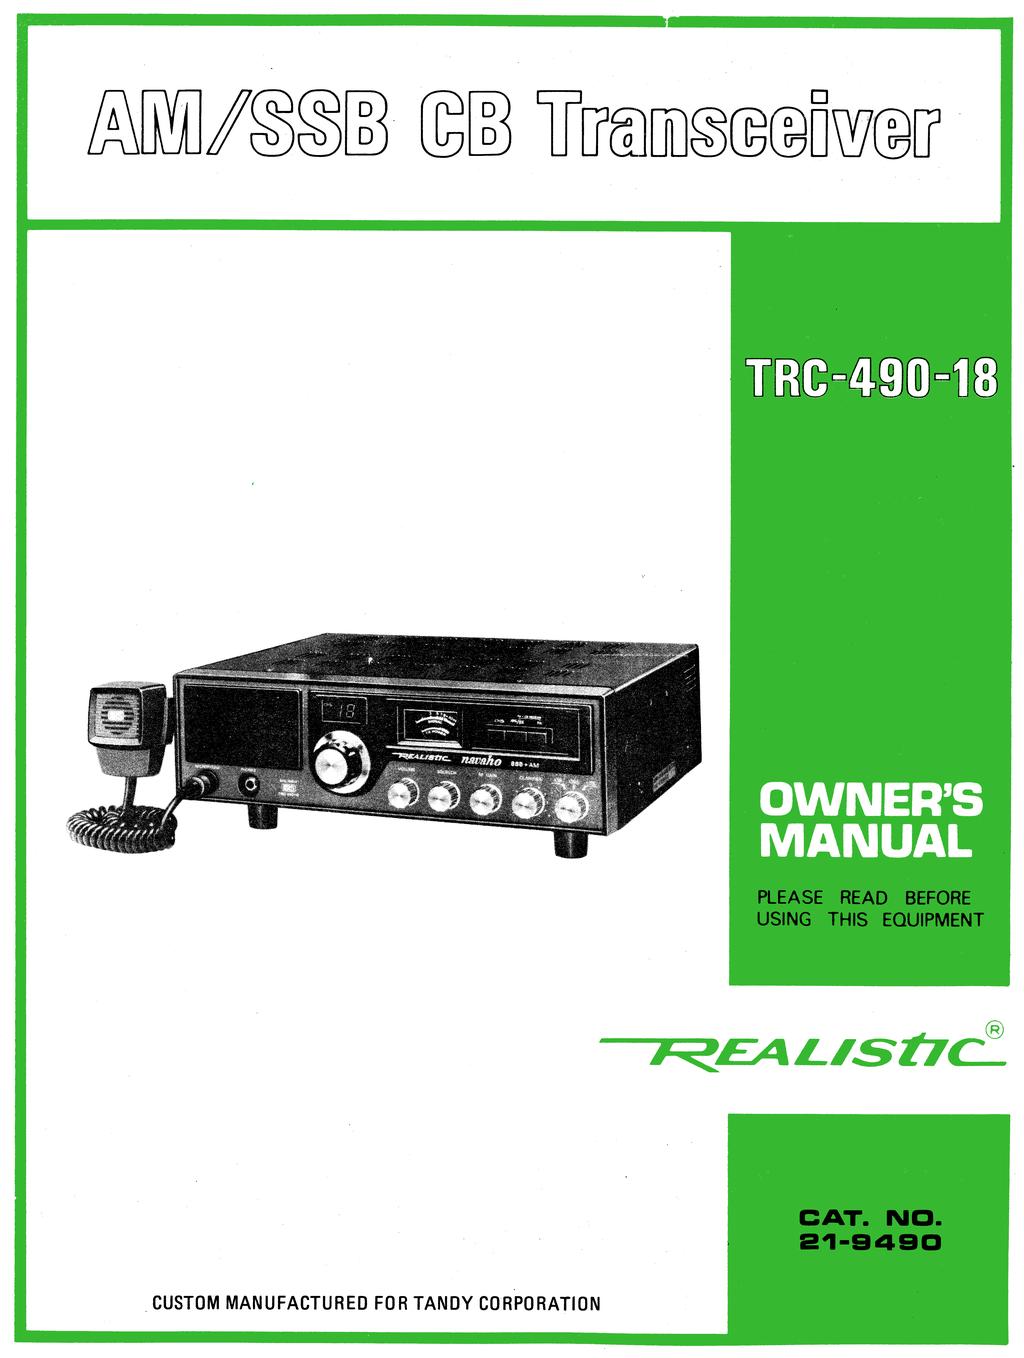 D EMTtEmawaT TRC-490-18 OWNER' MANU PLEASE READ BEFORE USING THIS